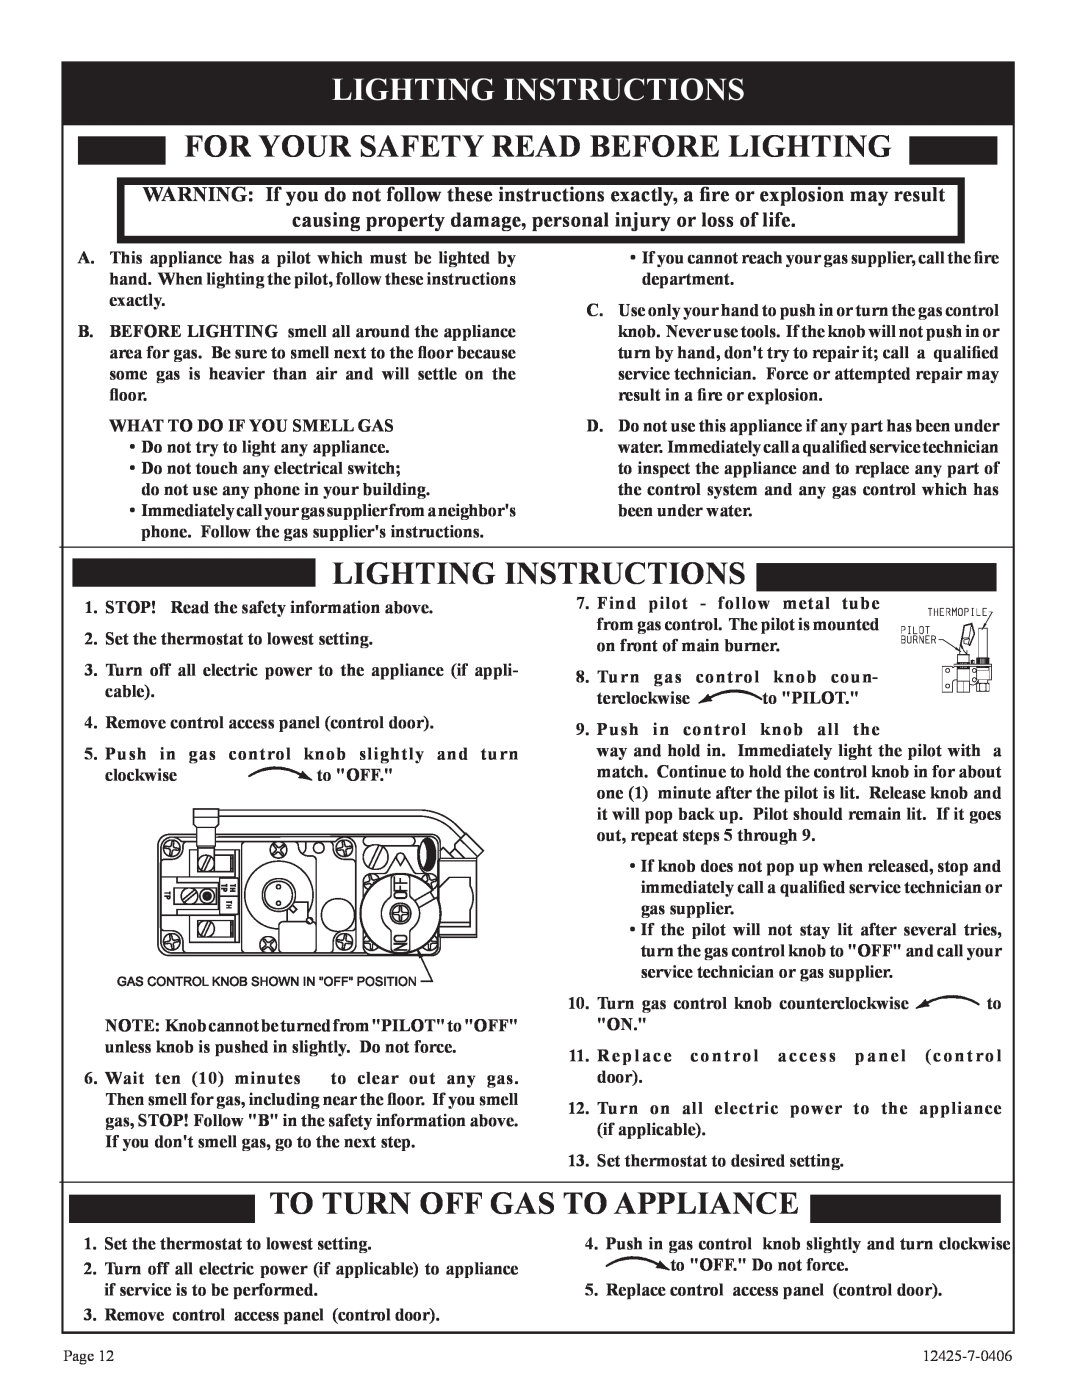 Empire Products GWT-35-2, RB) Lighting Instructions, For Your Safety Read Before Lighting, To Turn Off Gas To Appliance 